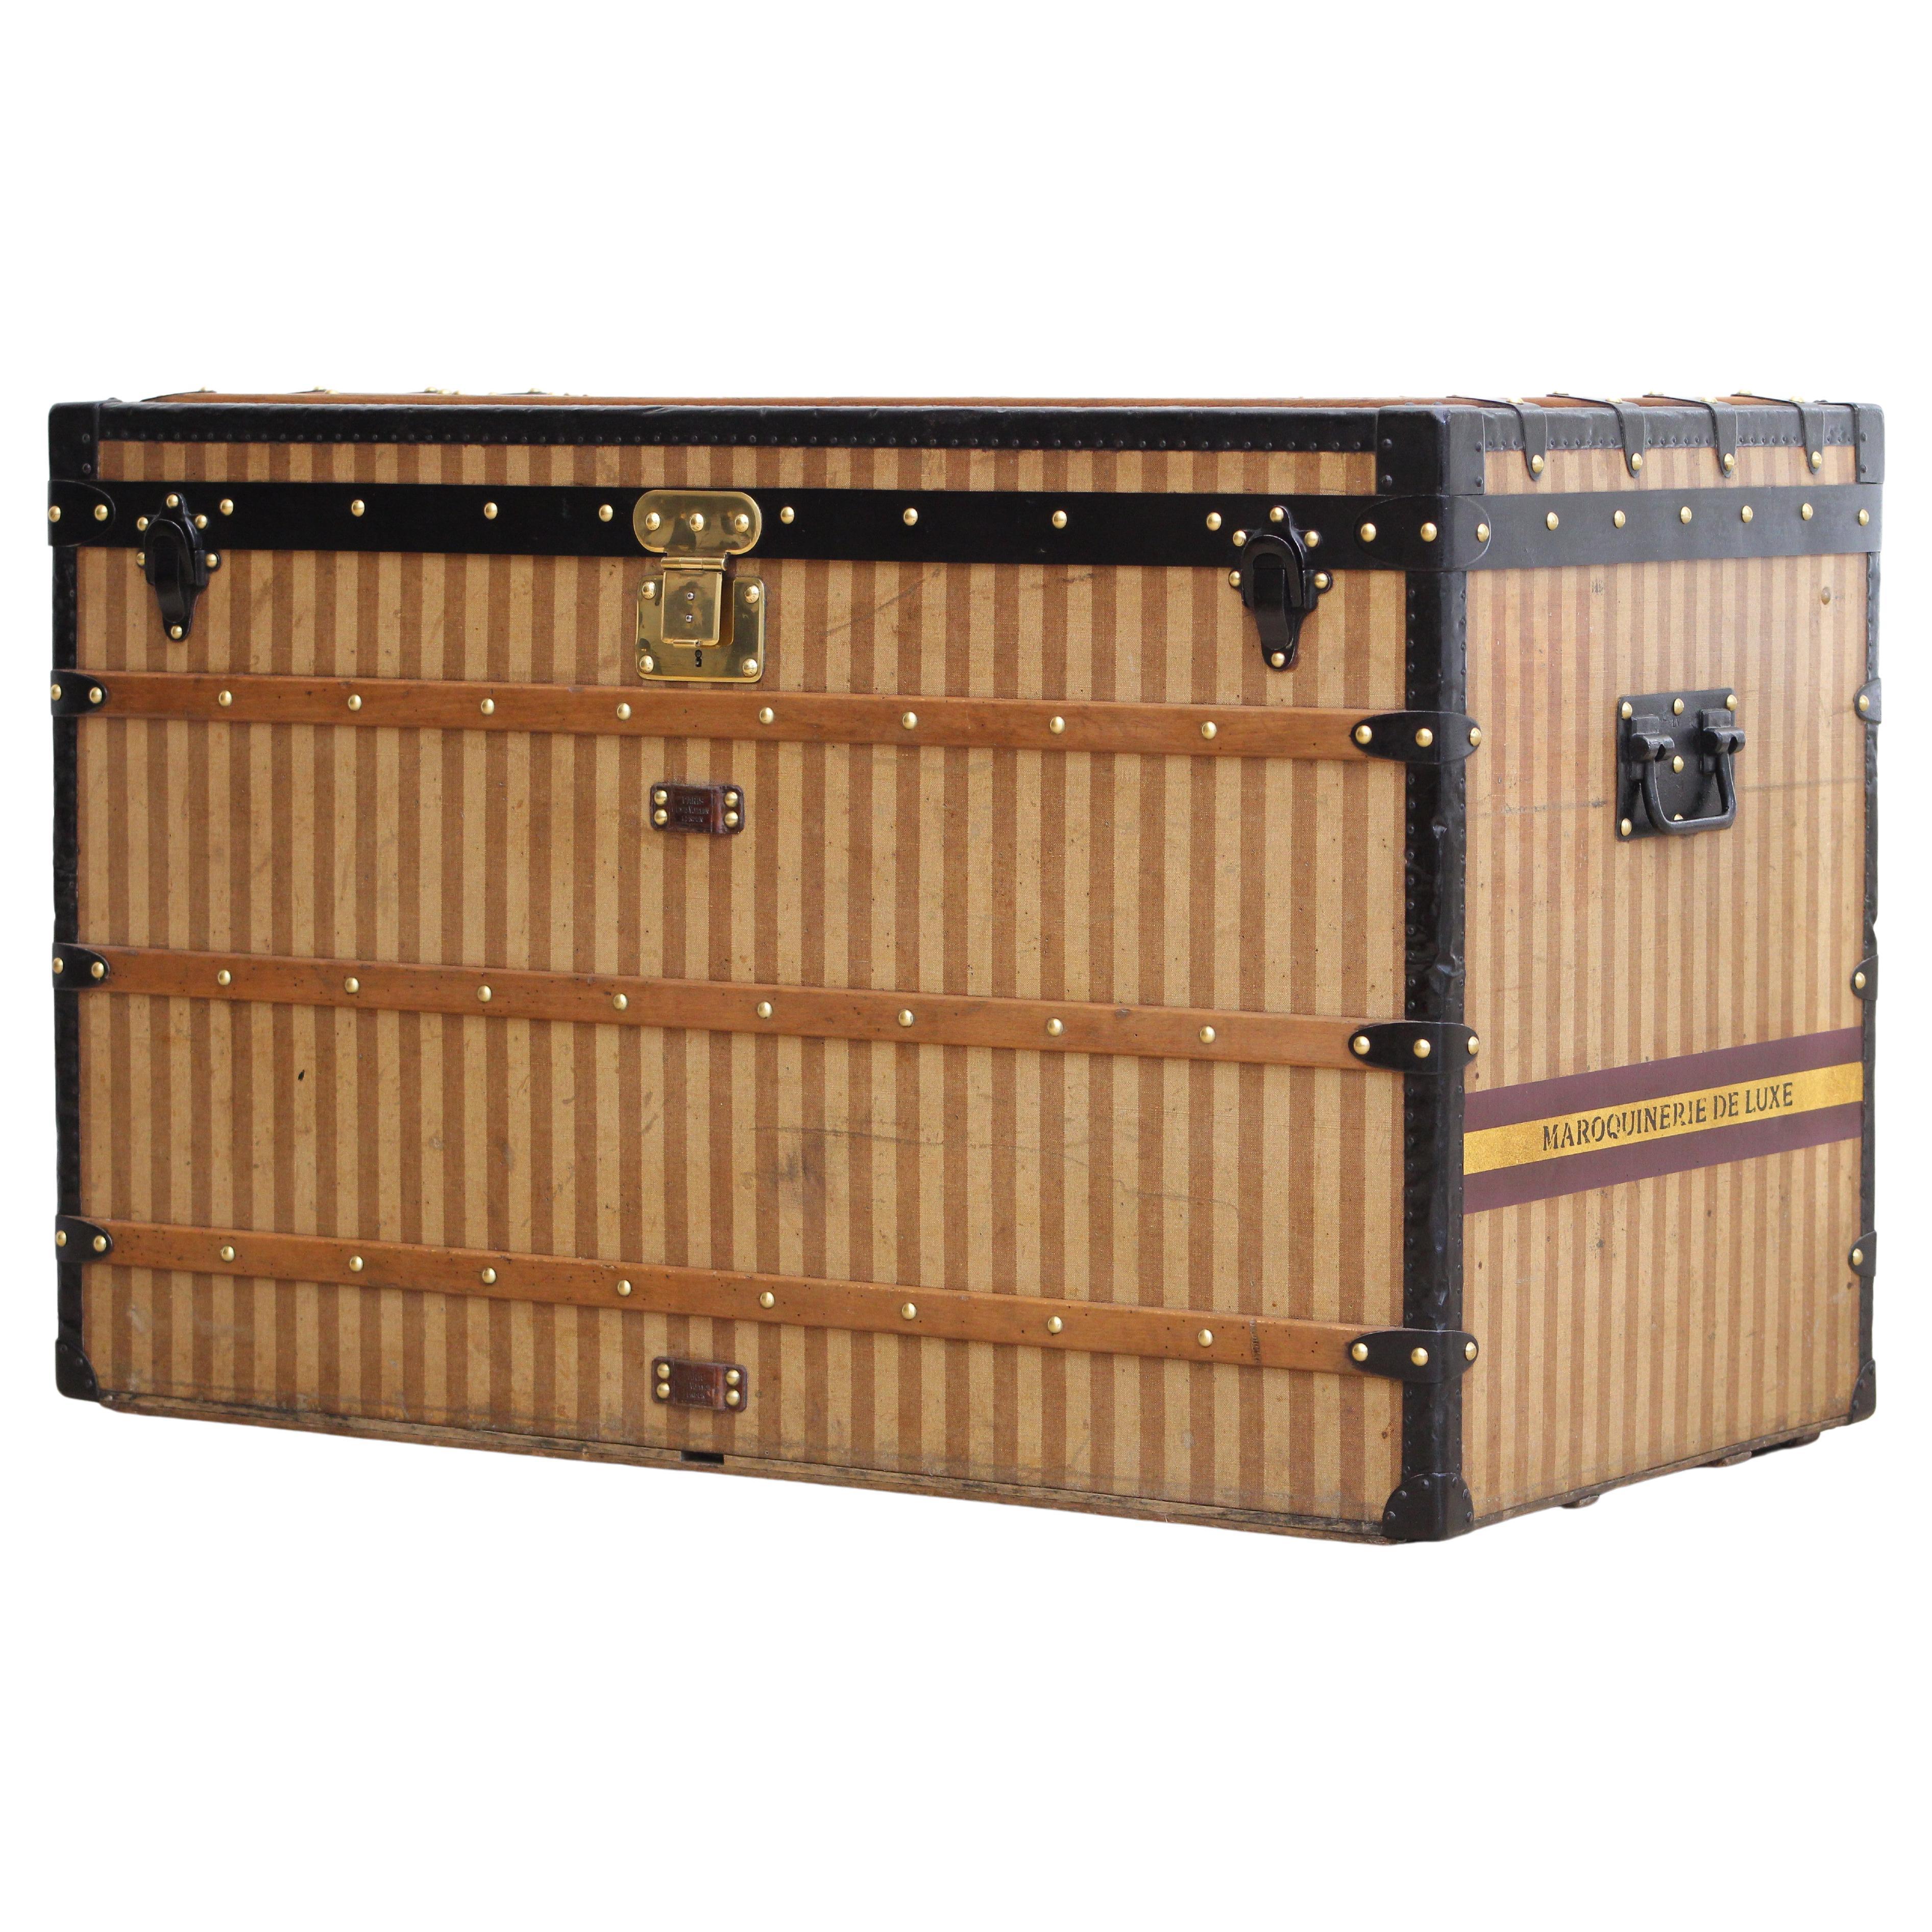 Rare and imposing monogrammed Louis Vuitton trunk